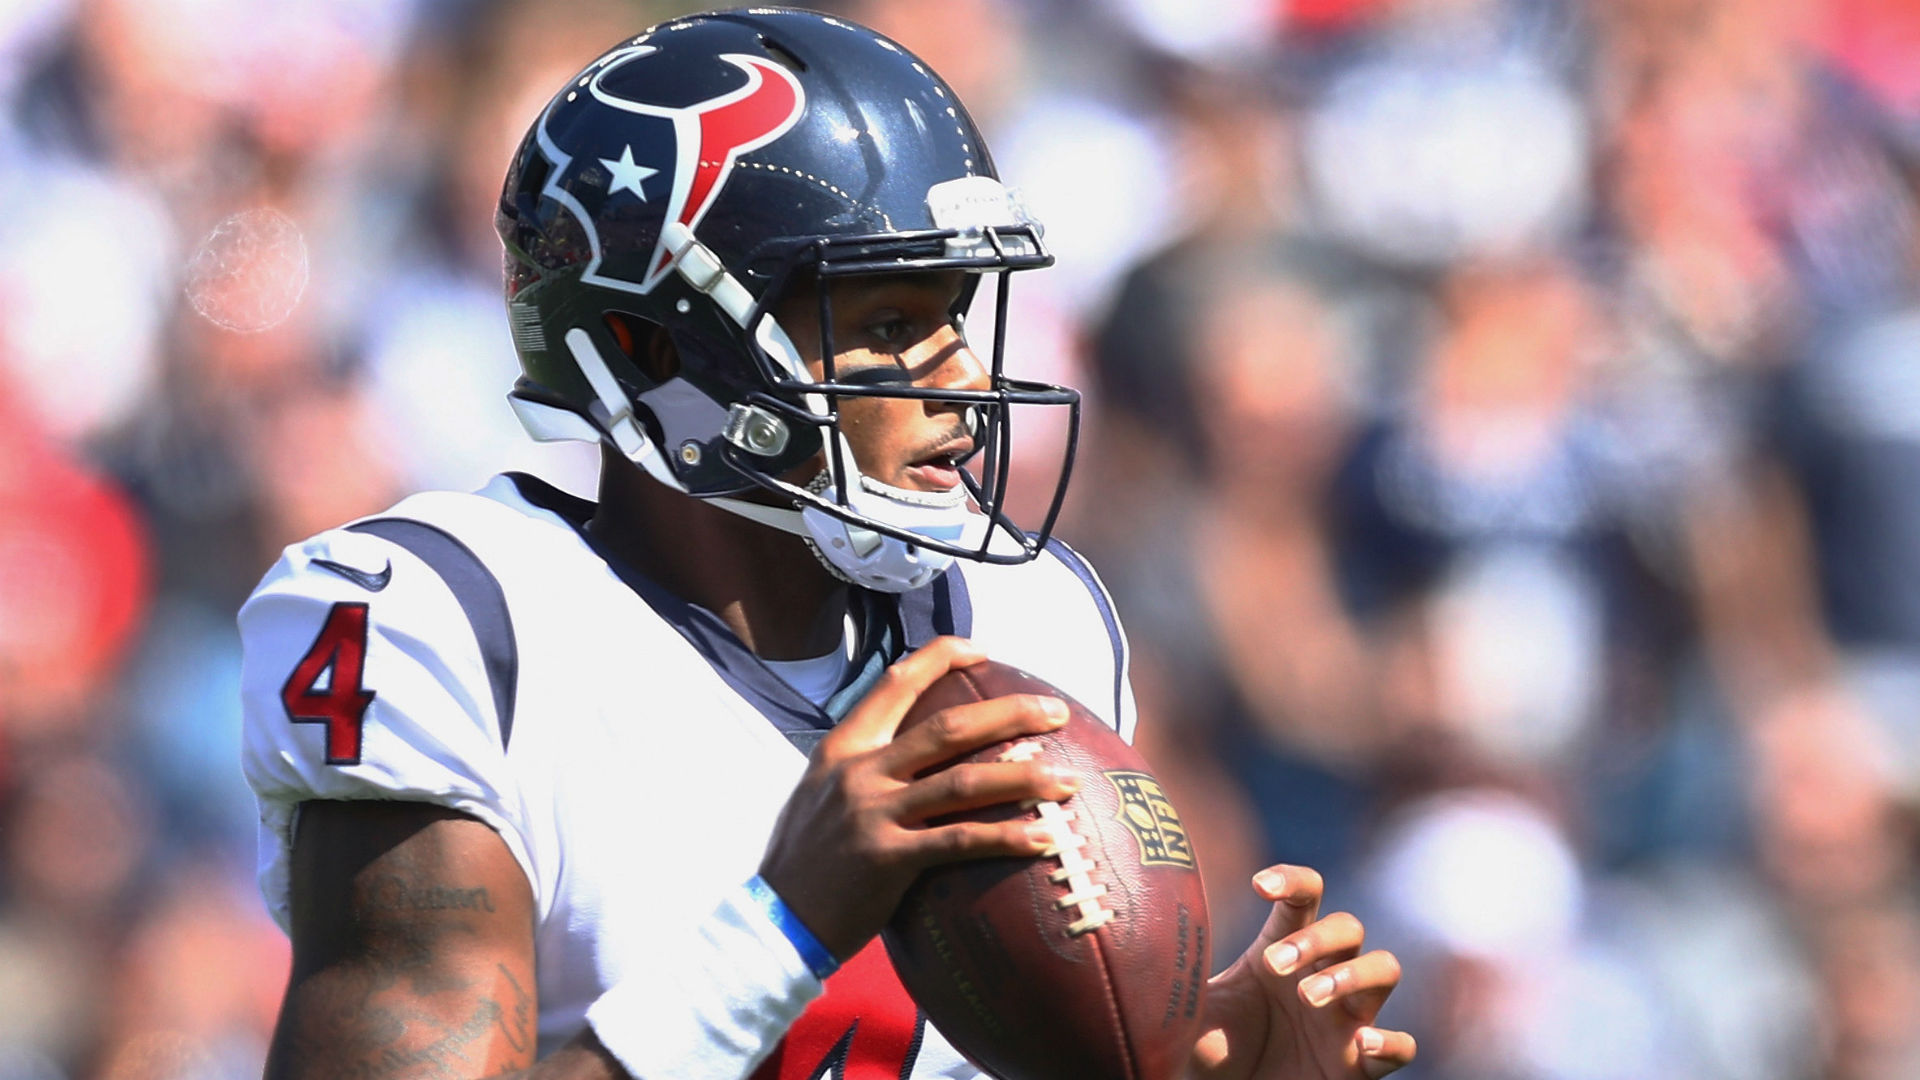 Watch: Texans QB Deshaun Watson gives first wage to cafeteria staff hit by Hurricane Harvey